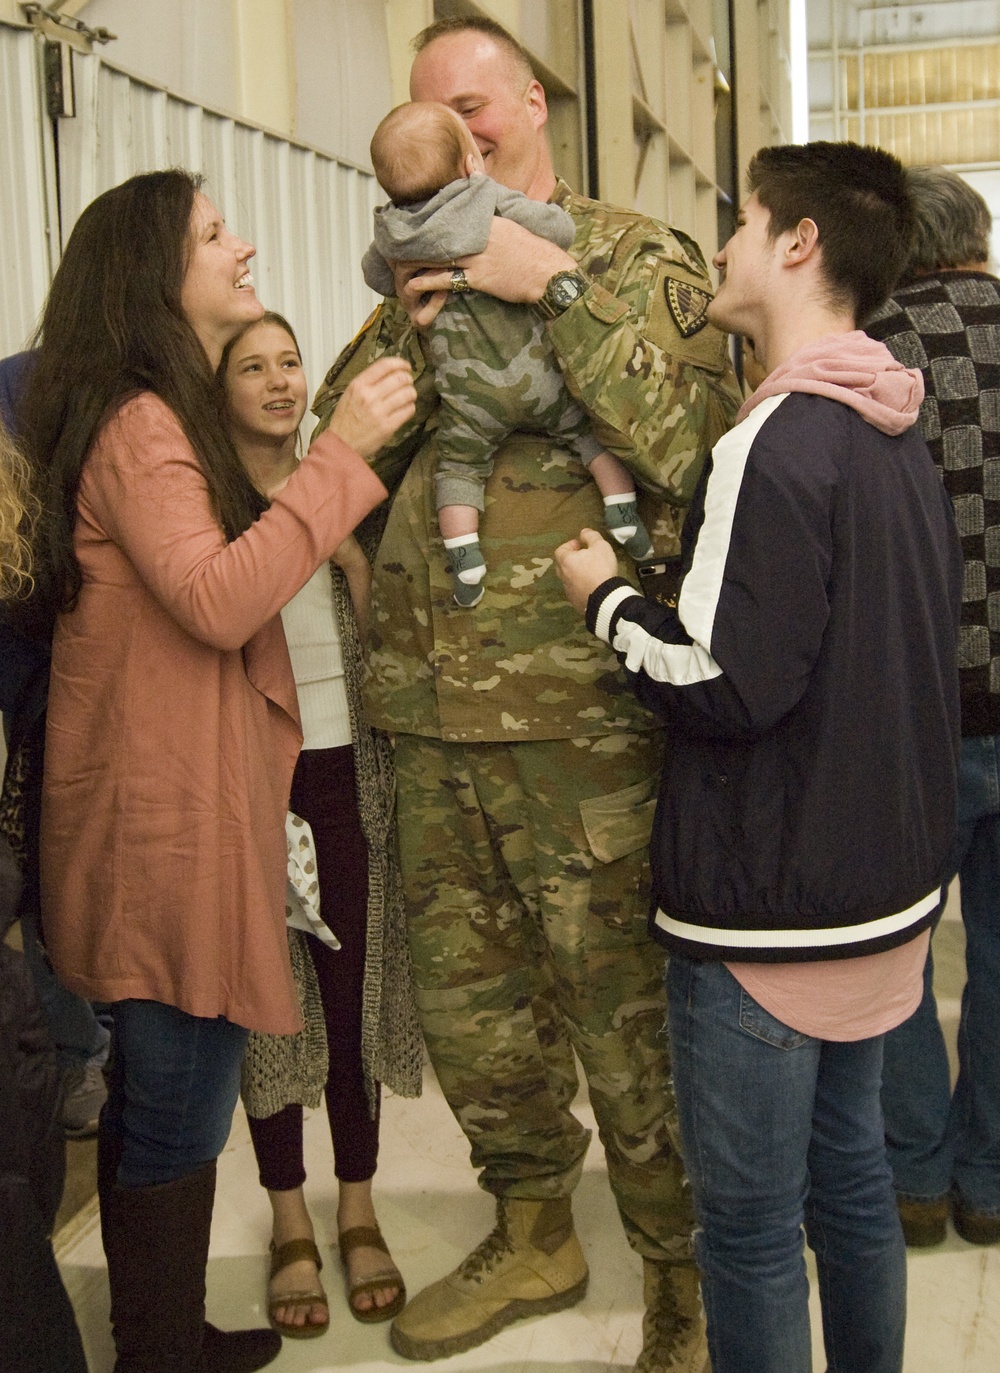 Welcome home dad! It's nice to meet you!